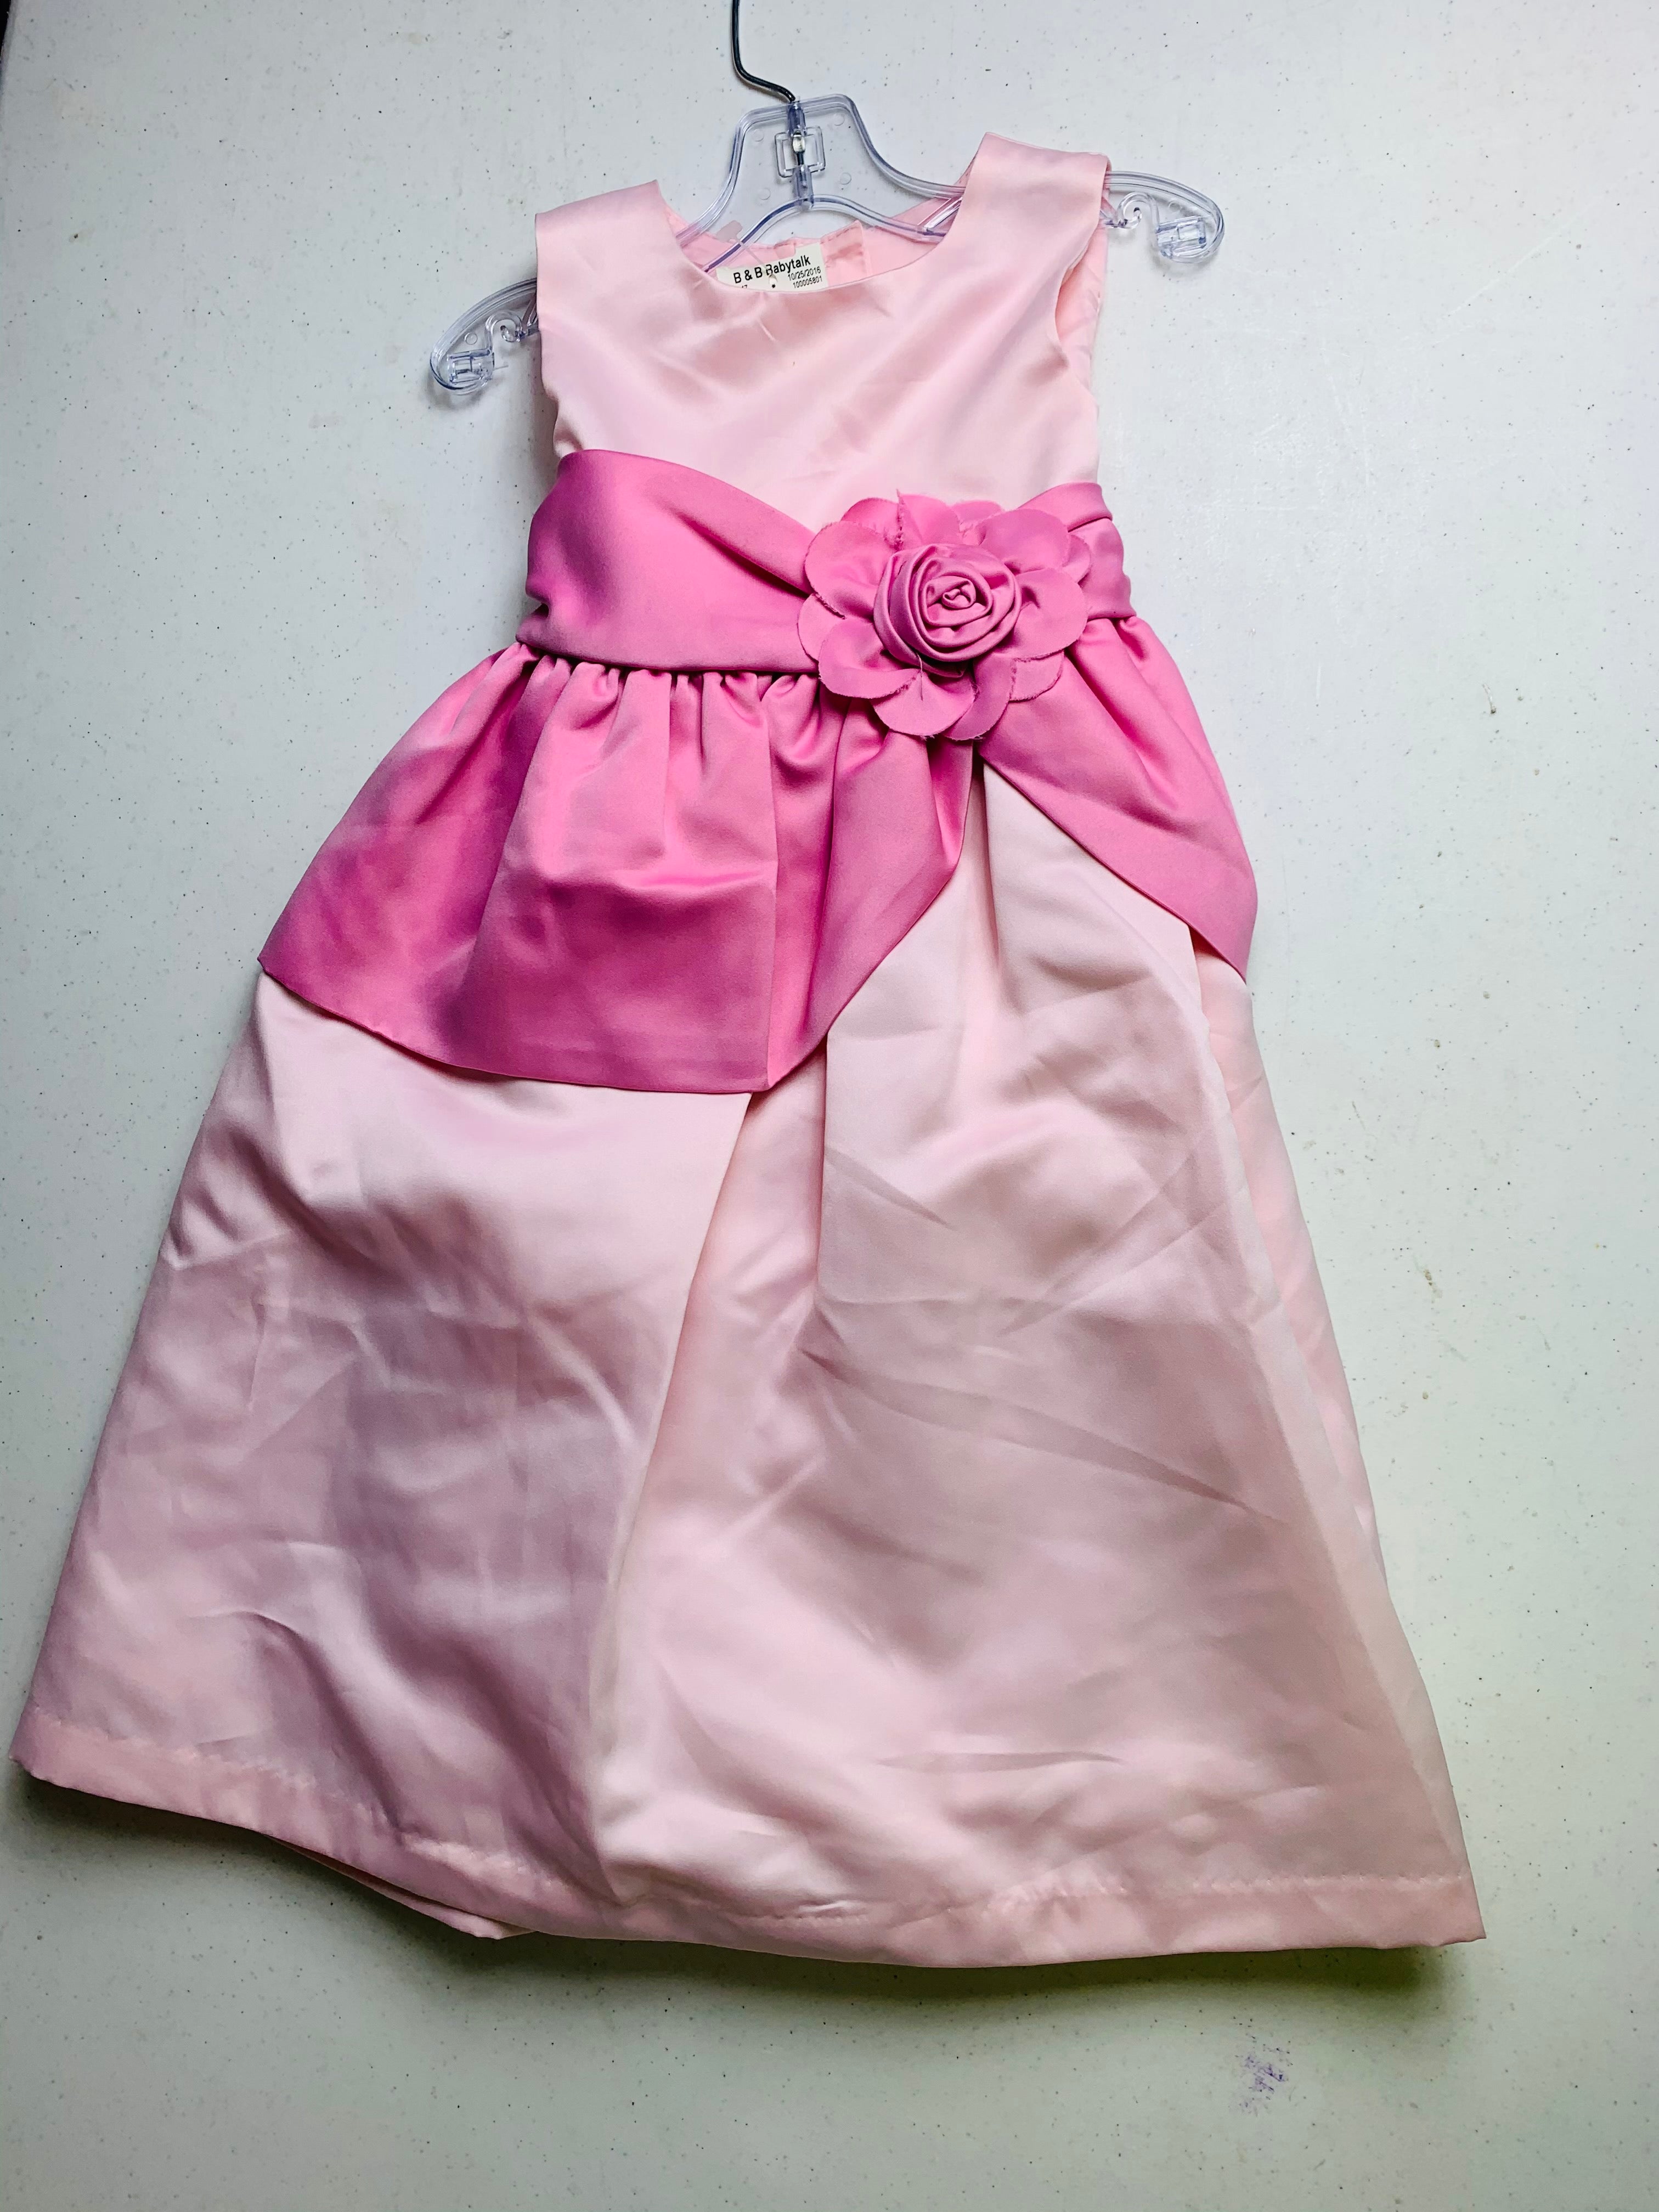 Resell Satin Pink Dress 4t 🧵